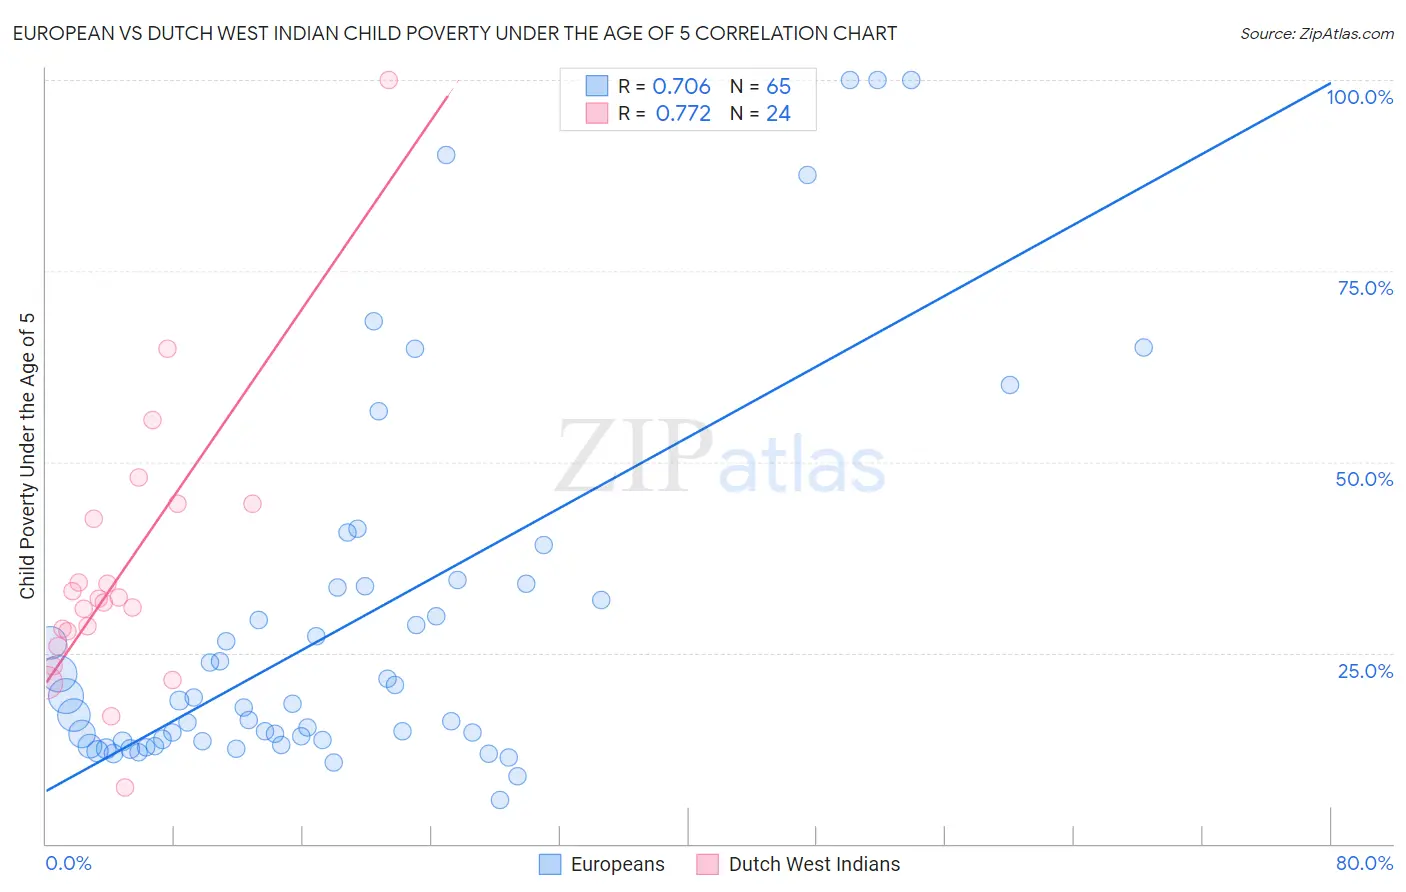 European vs Dutch West Indian Child Poverty Under the Age of 5